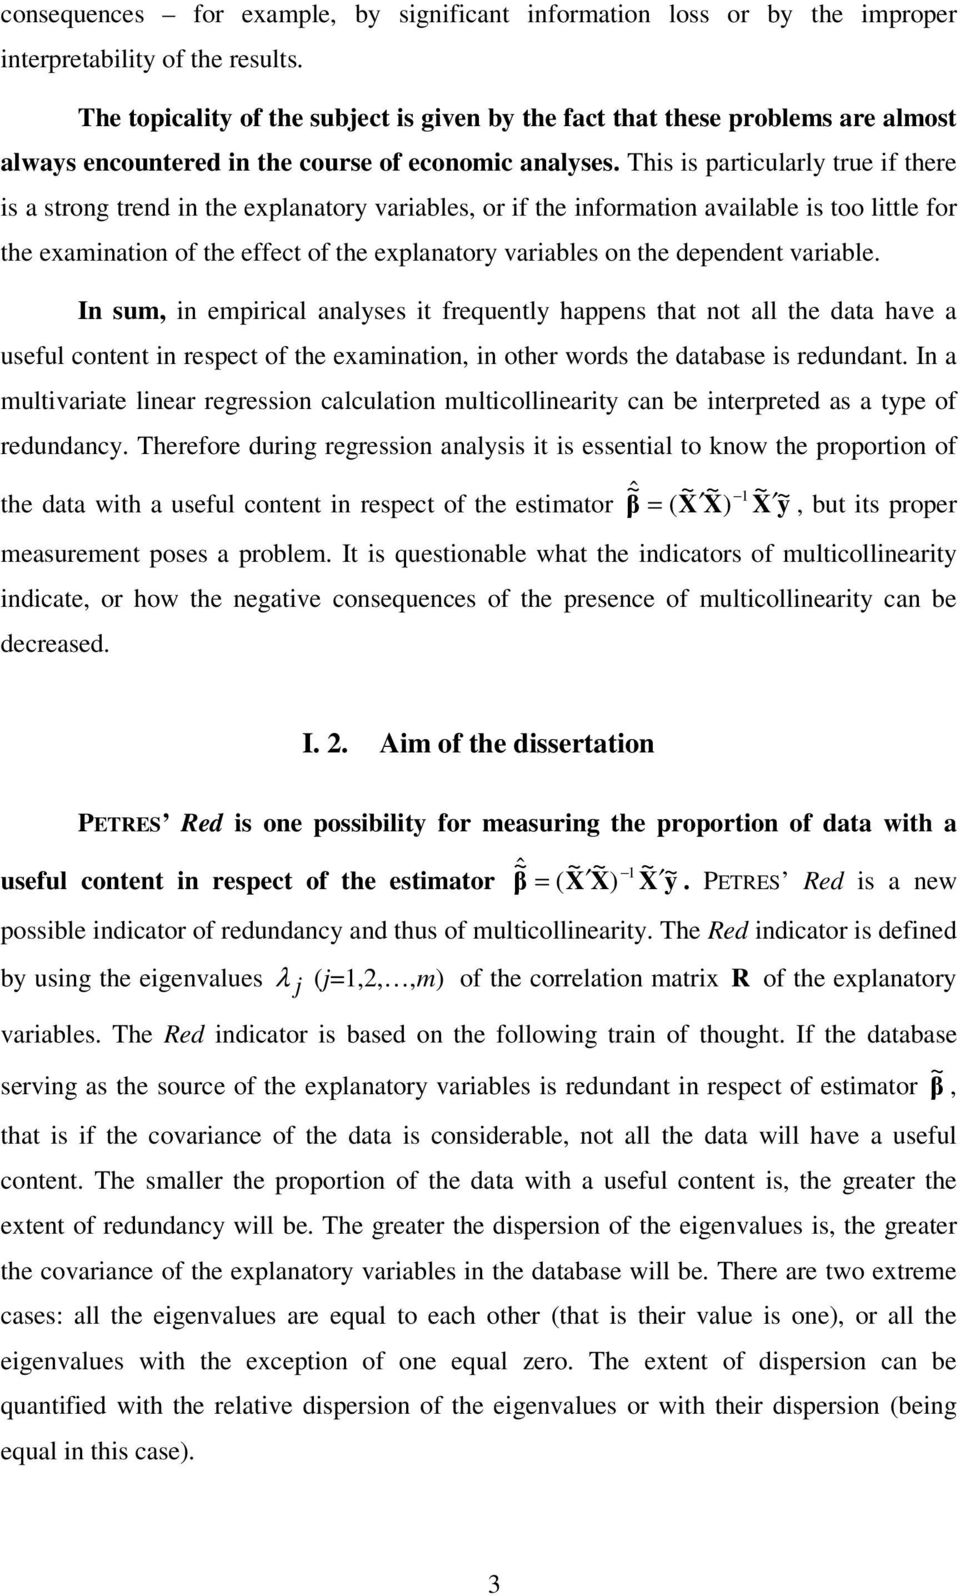 This is particularly true if there is a strong trend in the explanatory variables, or if the inforation available is too little for the exaination of the effect of the explanatory variables on the